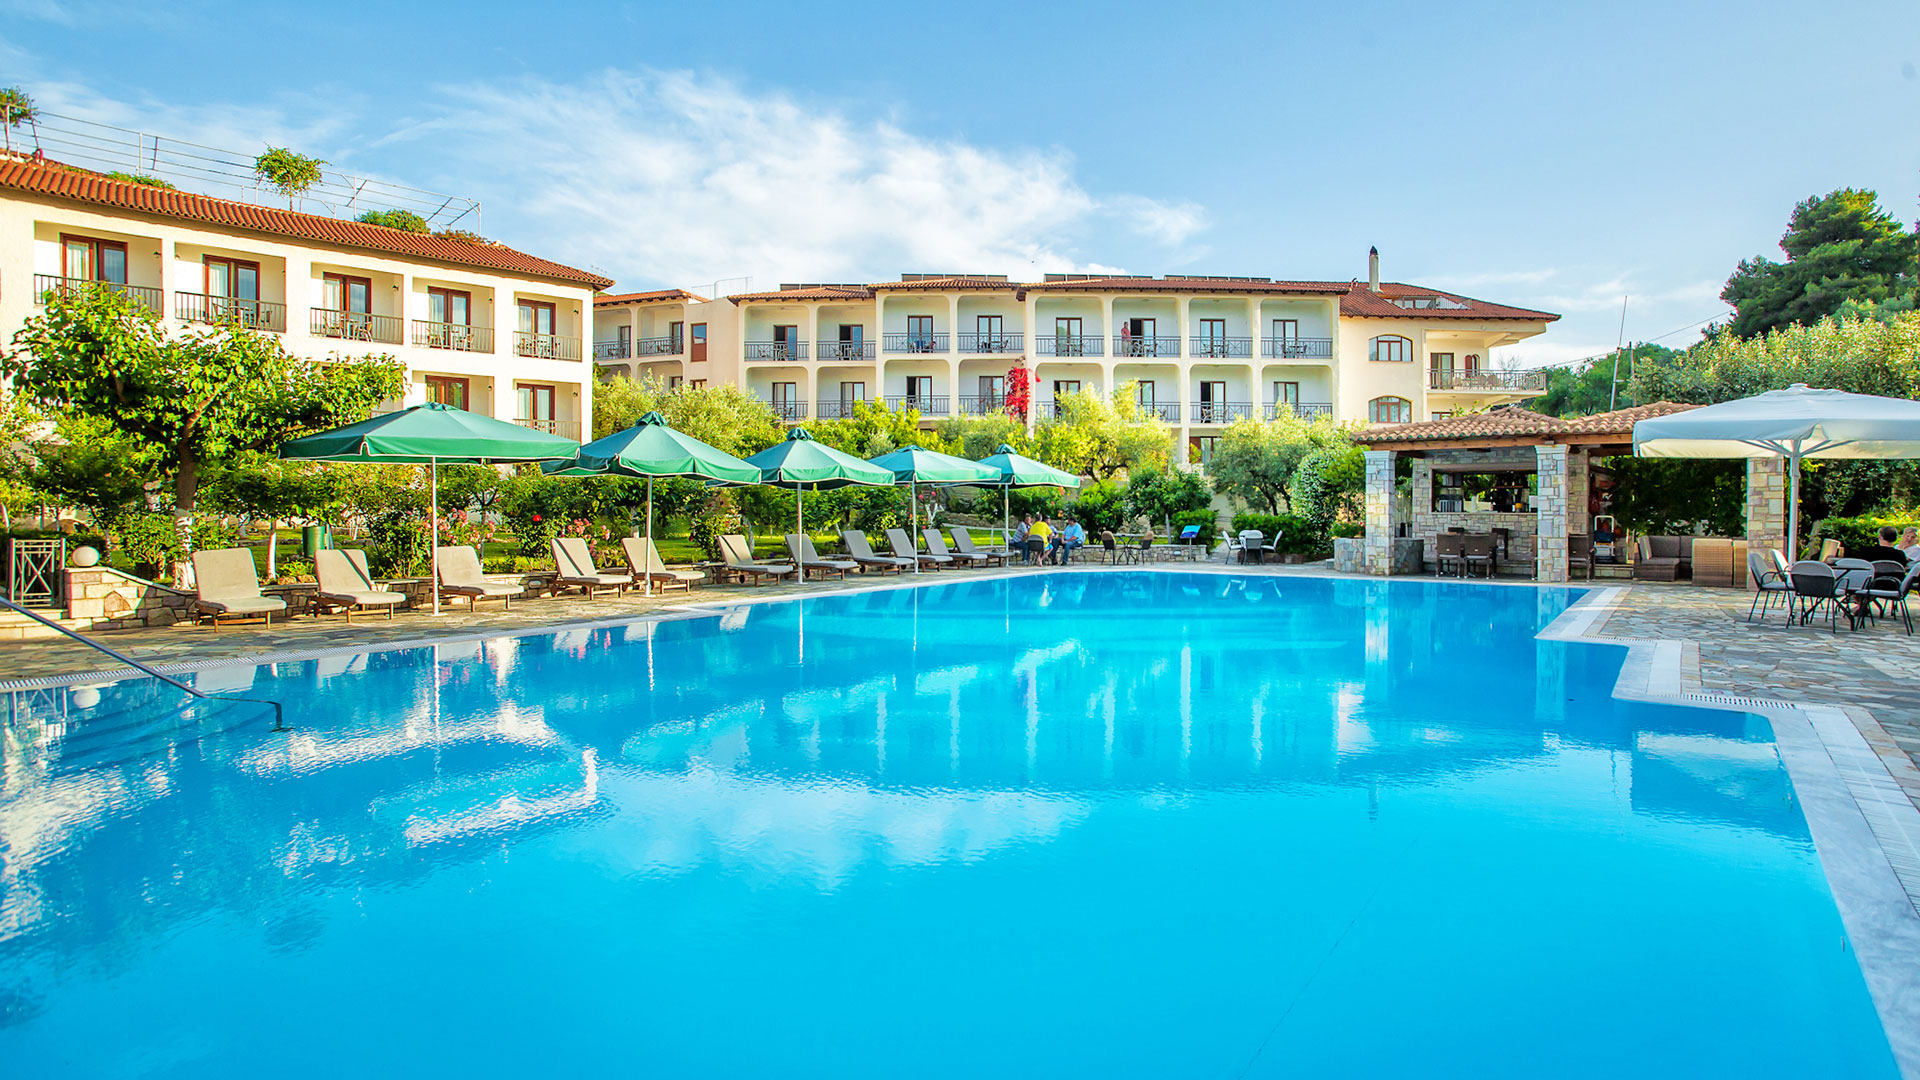 HOTEL OLYMPIA HOTELS OLYMPIA HOTEL ANCIENT OLYMPIA HOTELS ANCIENT ...